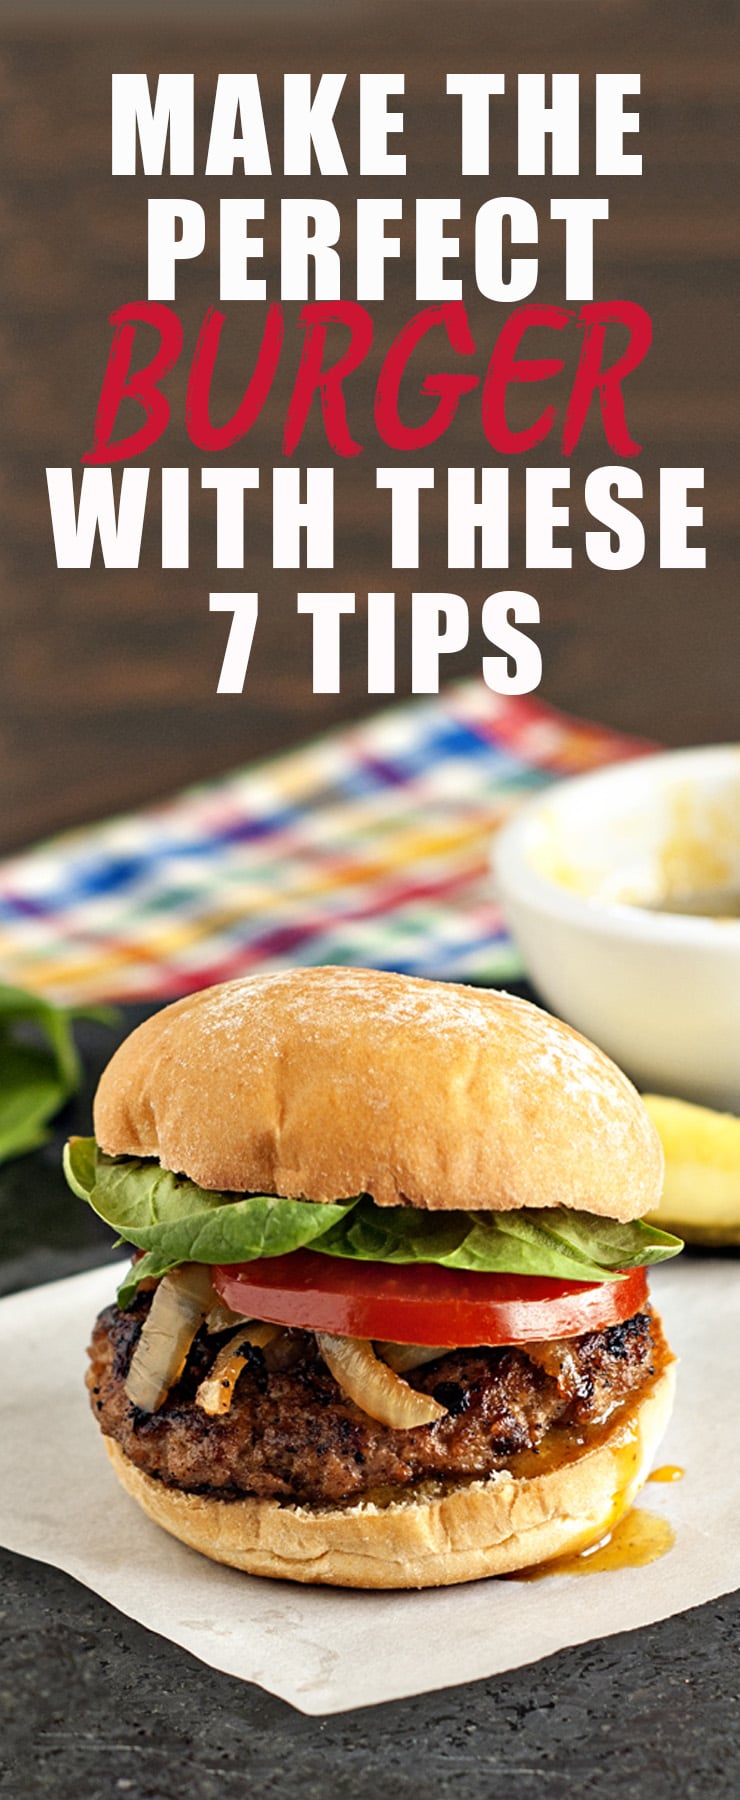 7 Cooking tips for perfect burgers